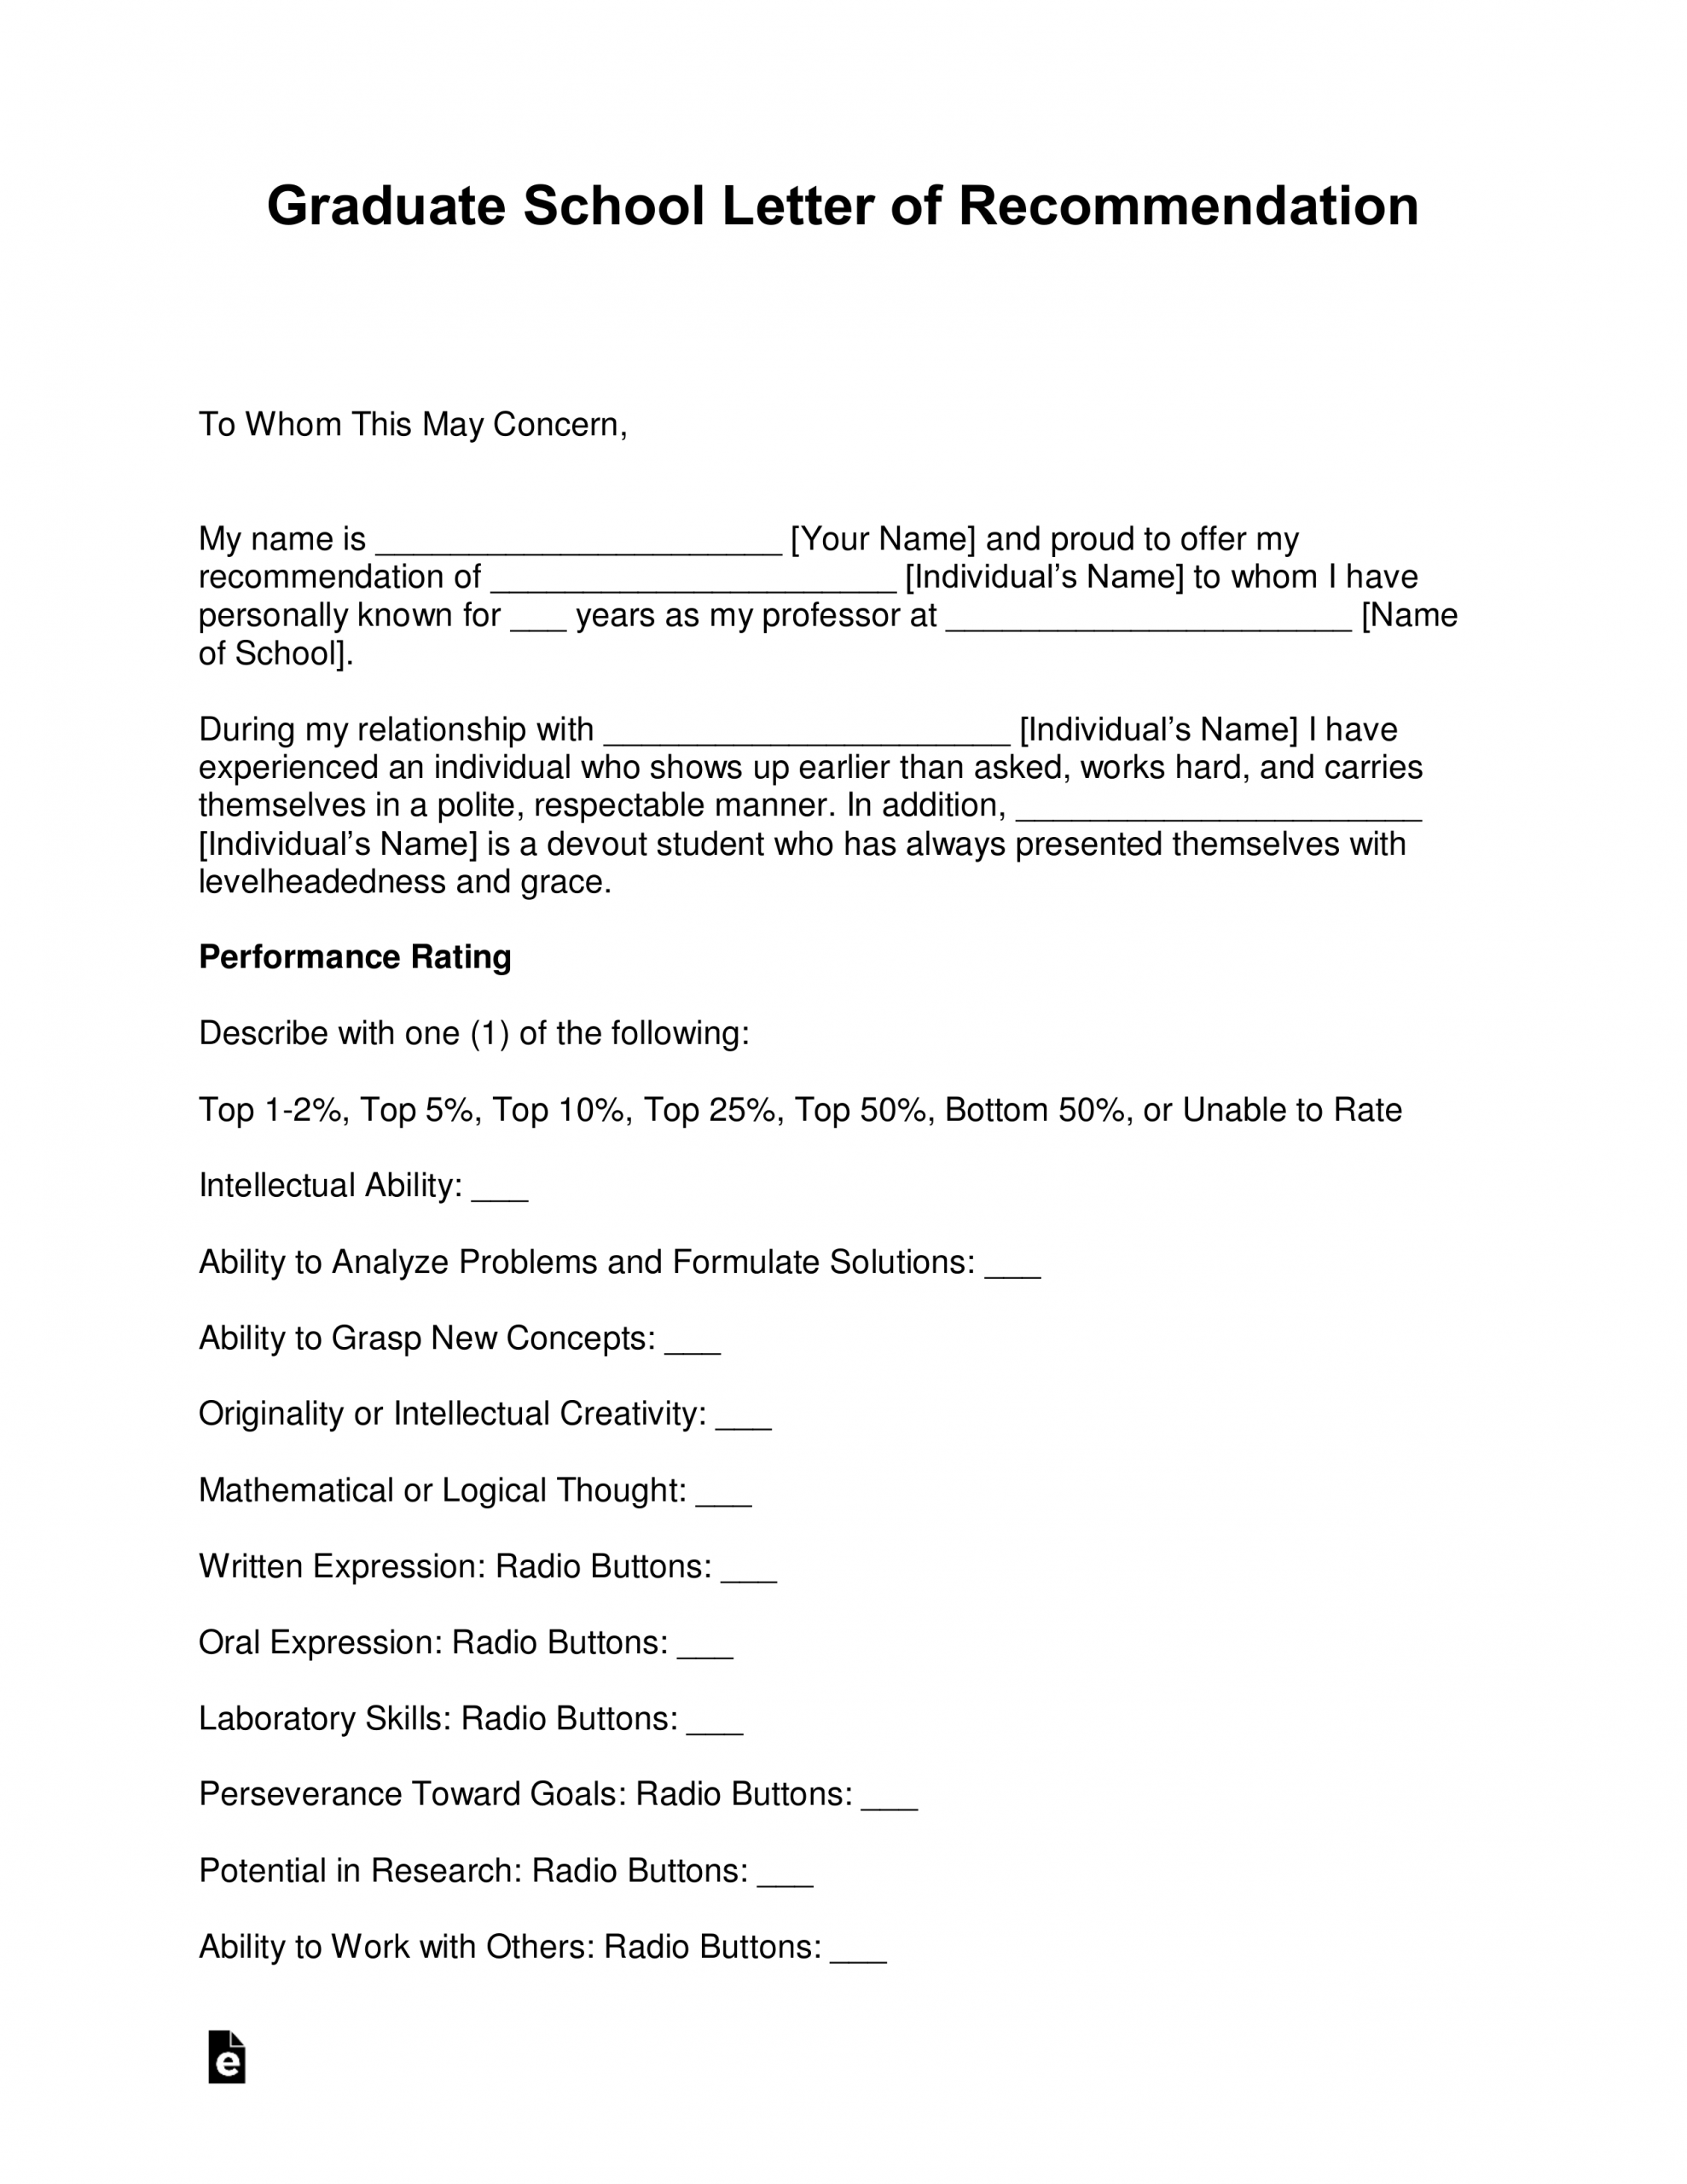 Free Graduate School Letter Of Recommendation Template regarding sizing 2550 X 3301